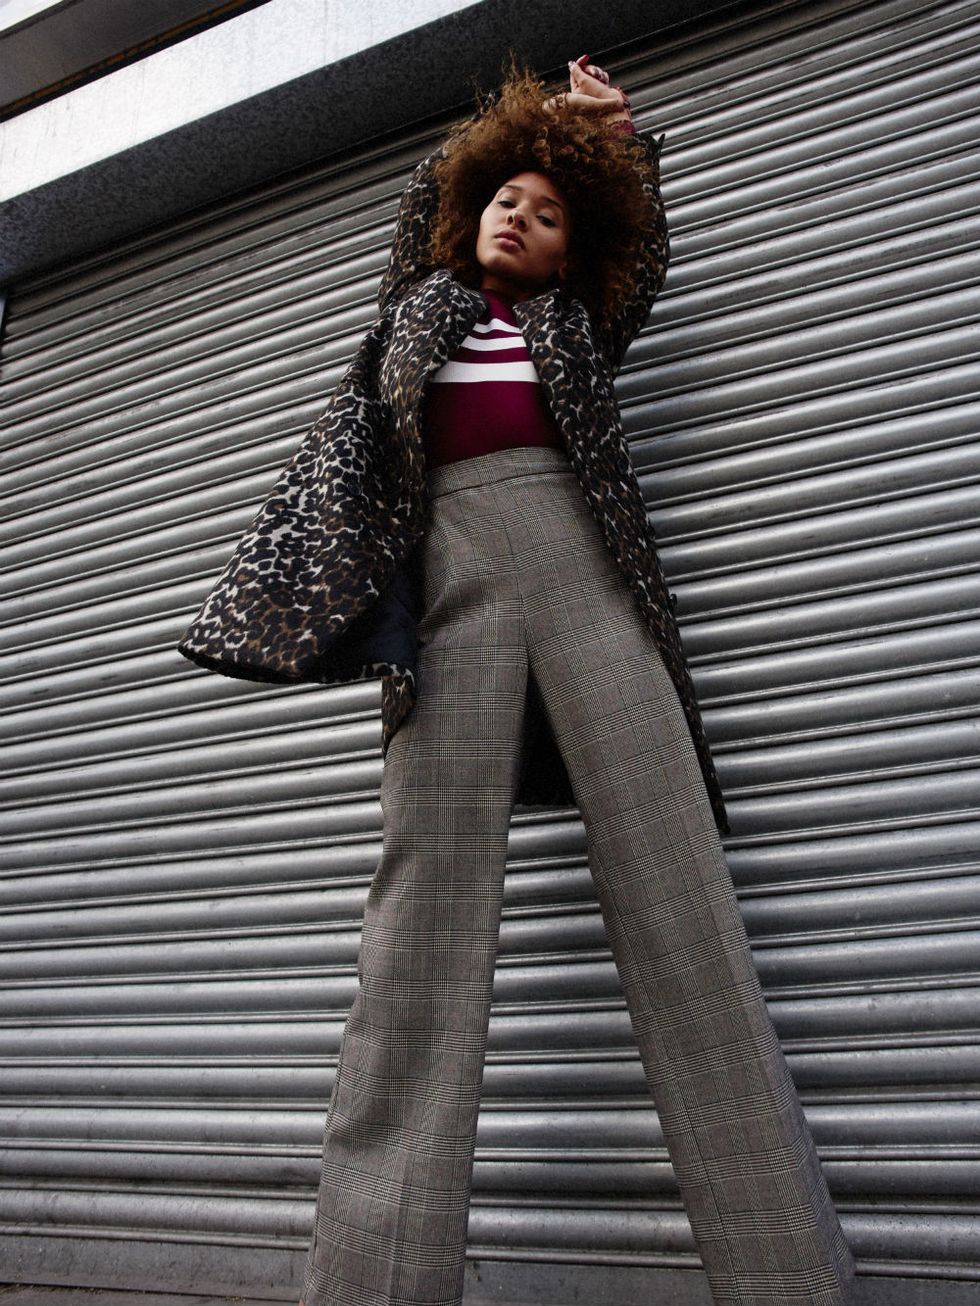 V by Very animal print coat and wide legged trousers